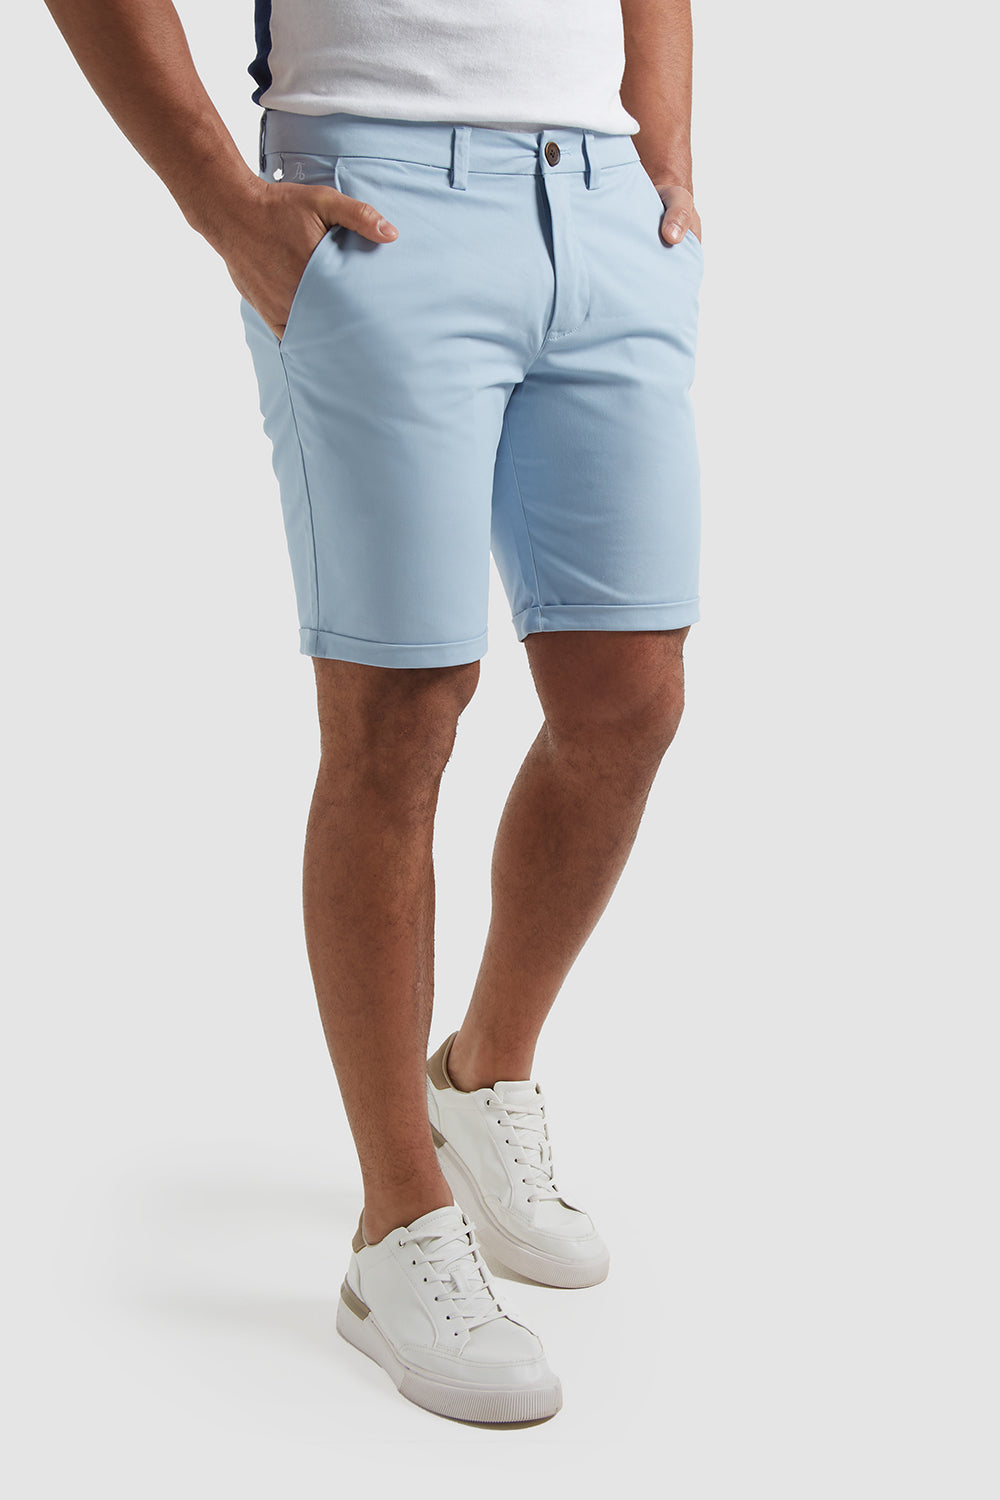 Athletic Fit Chino Shorts in Pale Blue - TAILORED ATHLETE - USA